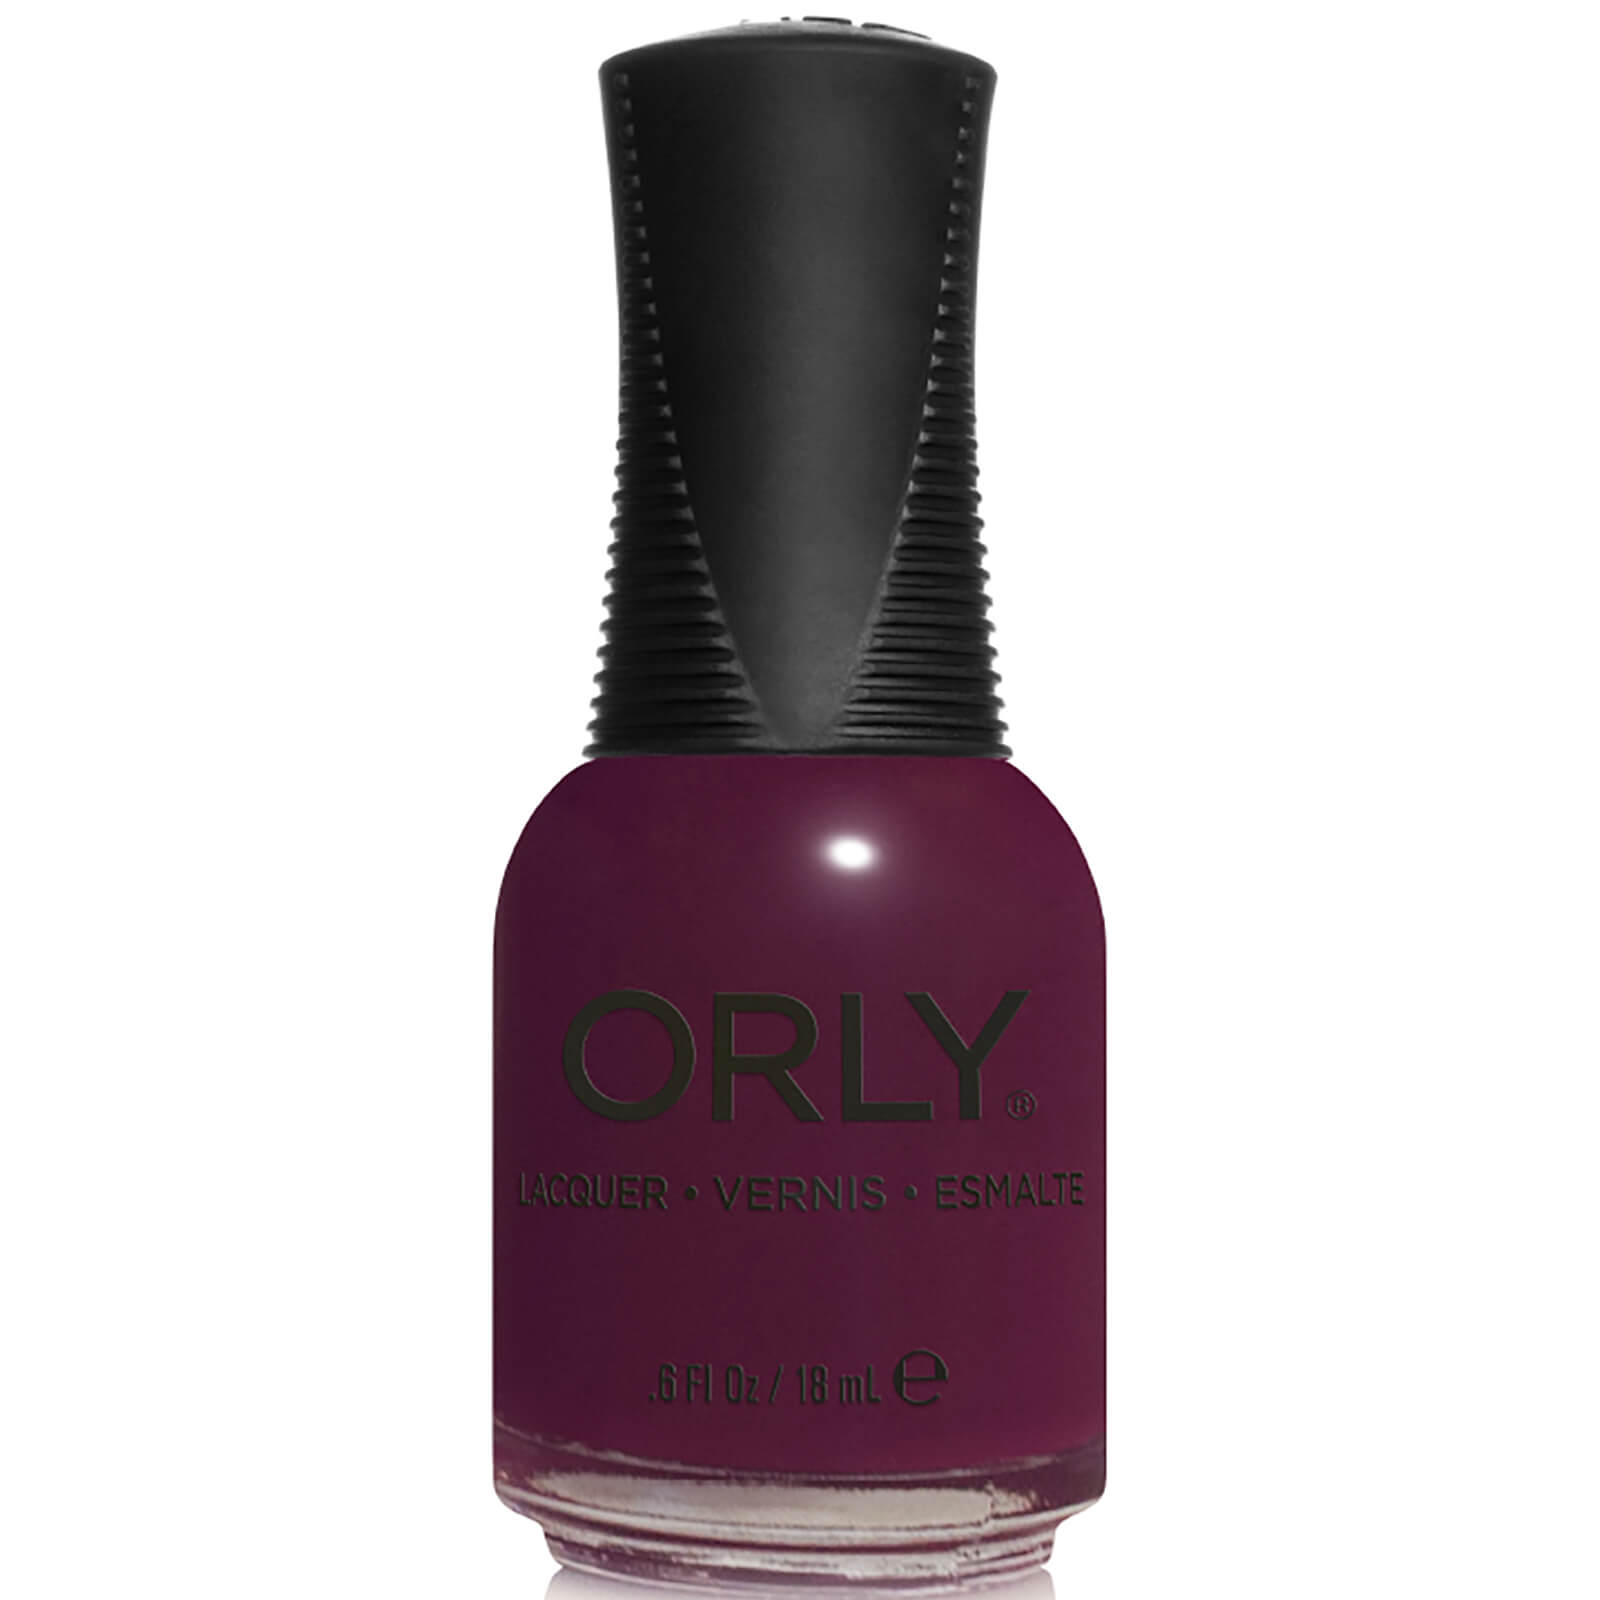 Orly Nail Lacquer 18ml (Various Shades) - Black Cherry